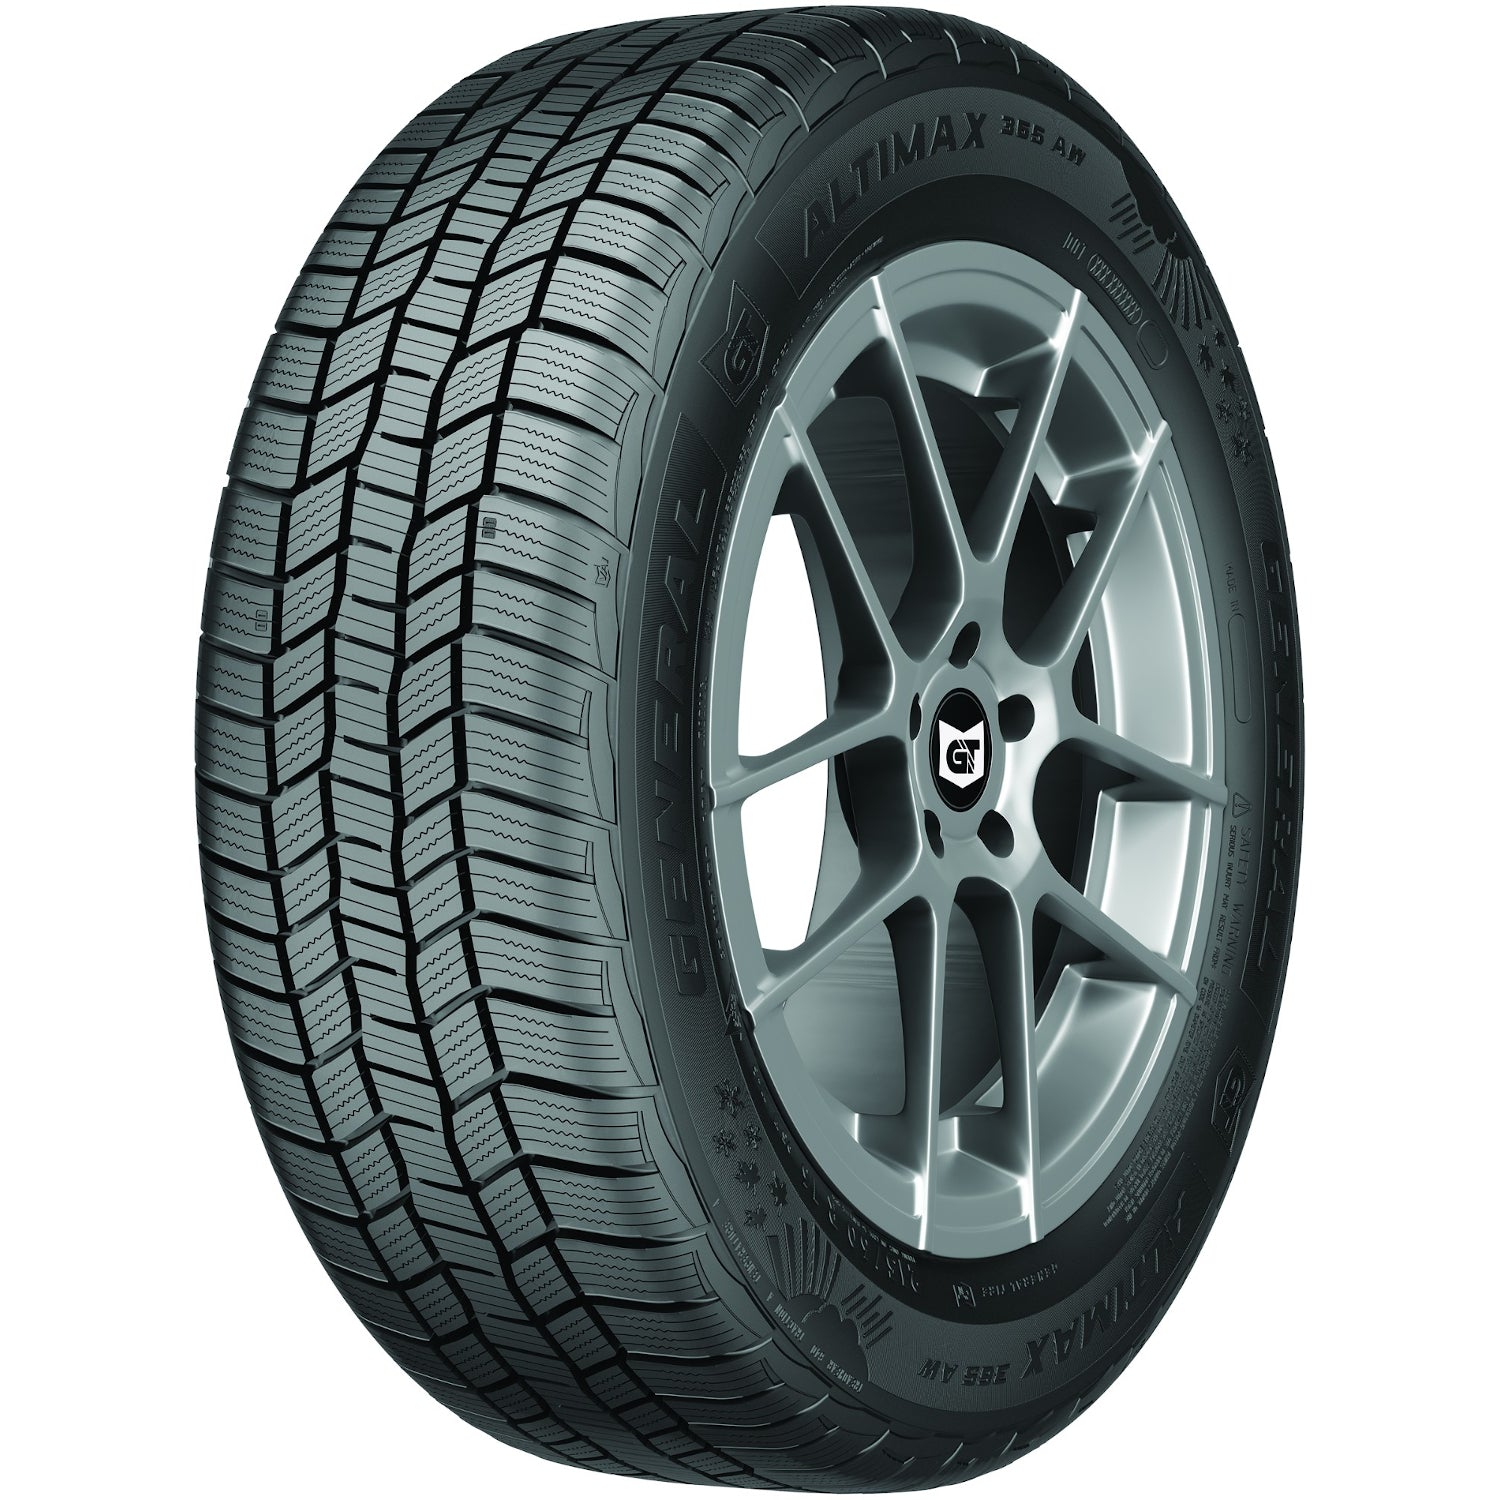 GENERAL ALTIMAX 365AW 245/45R18 (26.7X9.7R 18) Tires